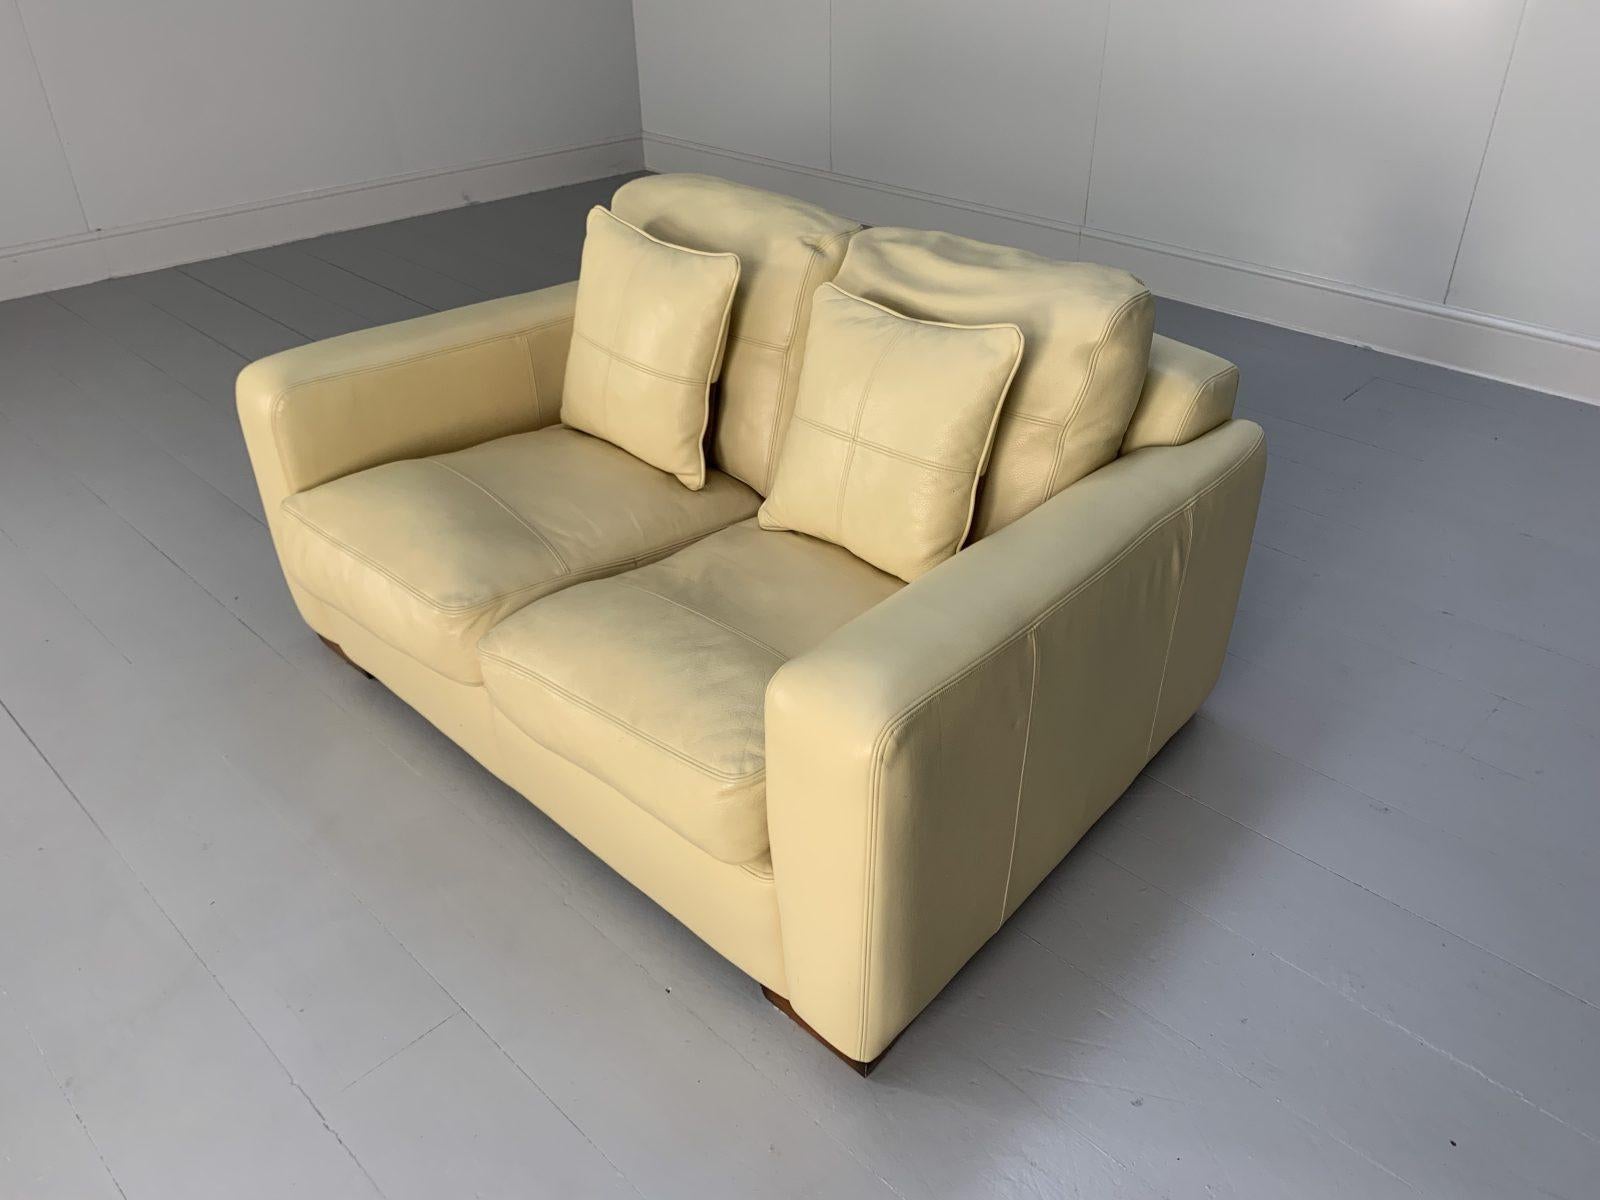 Duresta “Panther” 2-Seat Sofa – in Cream Leather For Sale 2